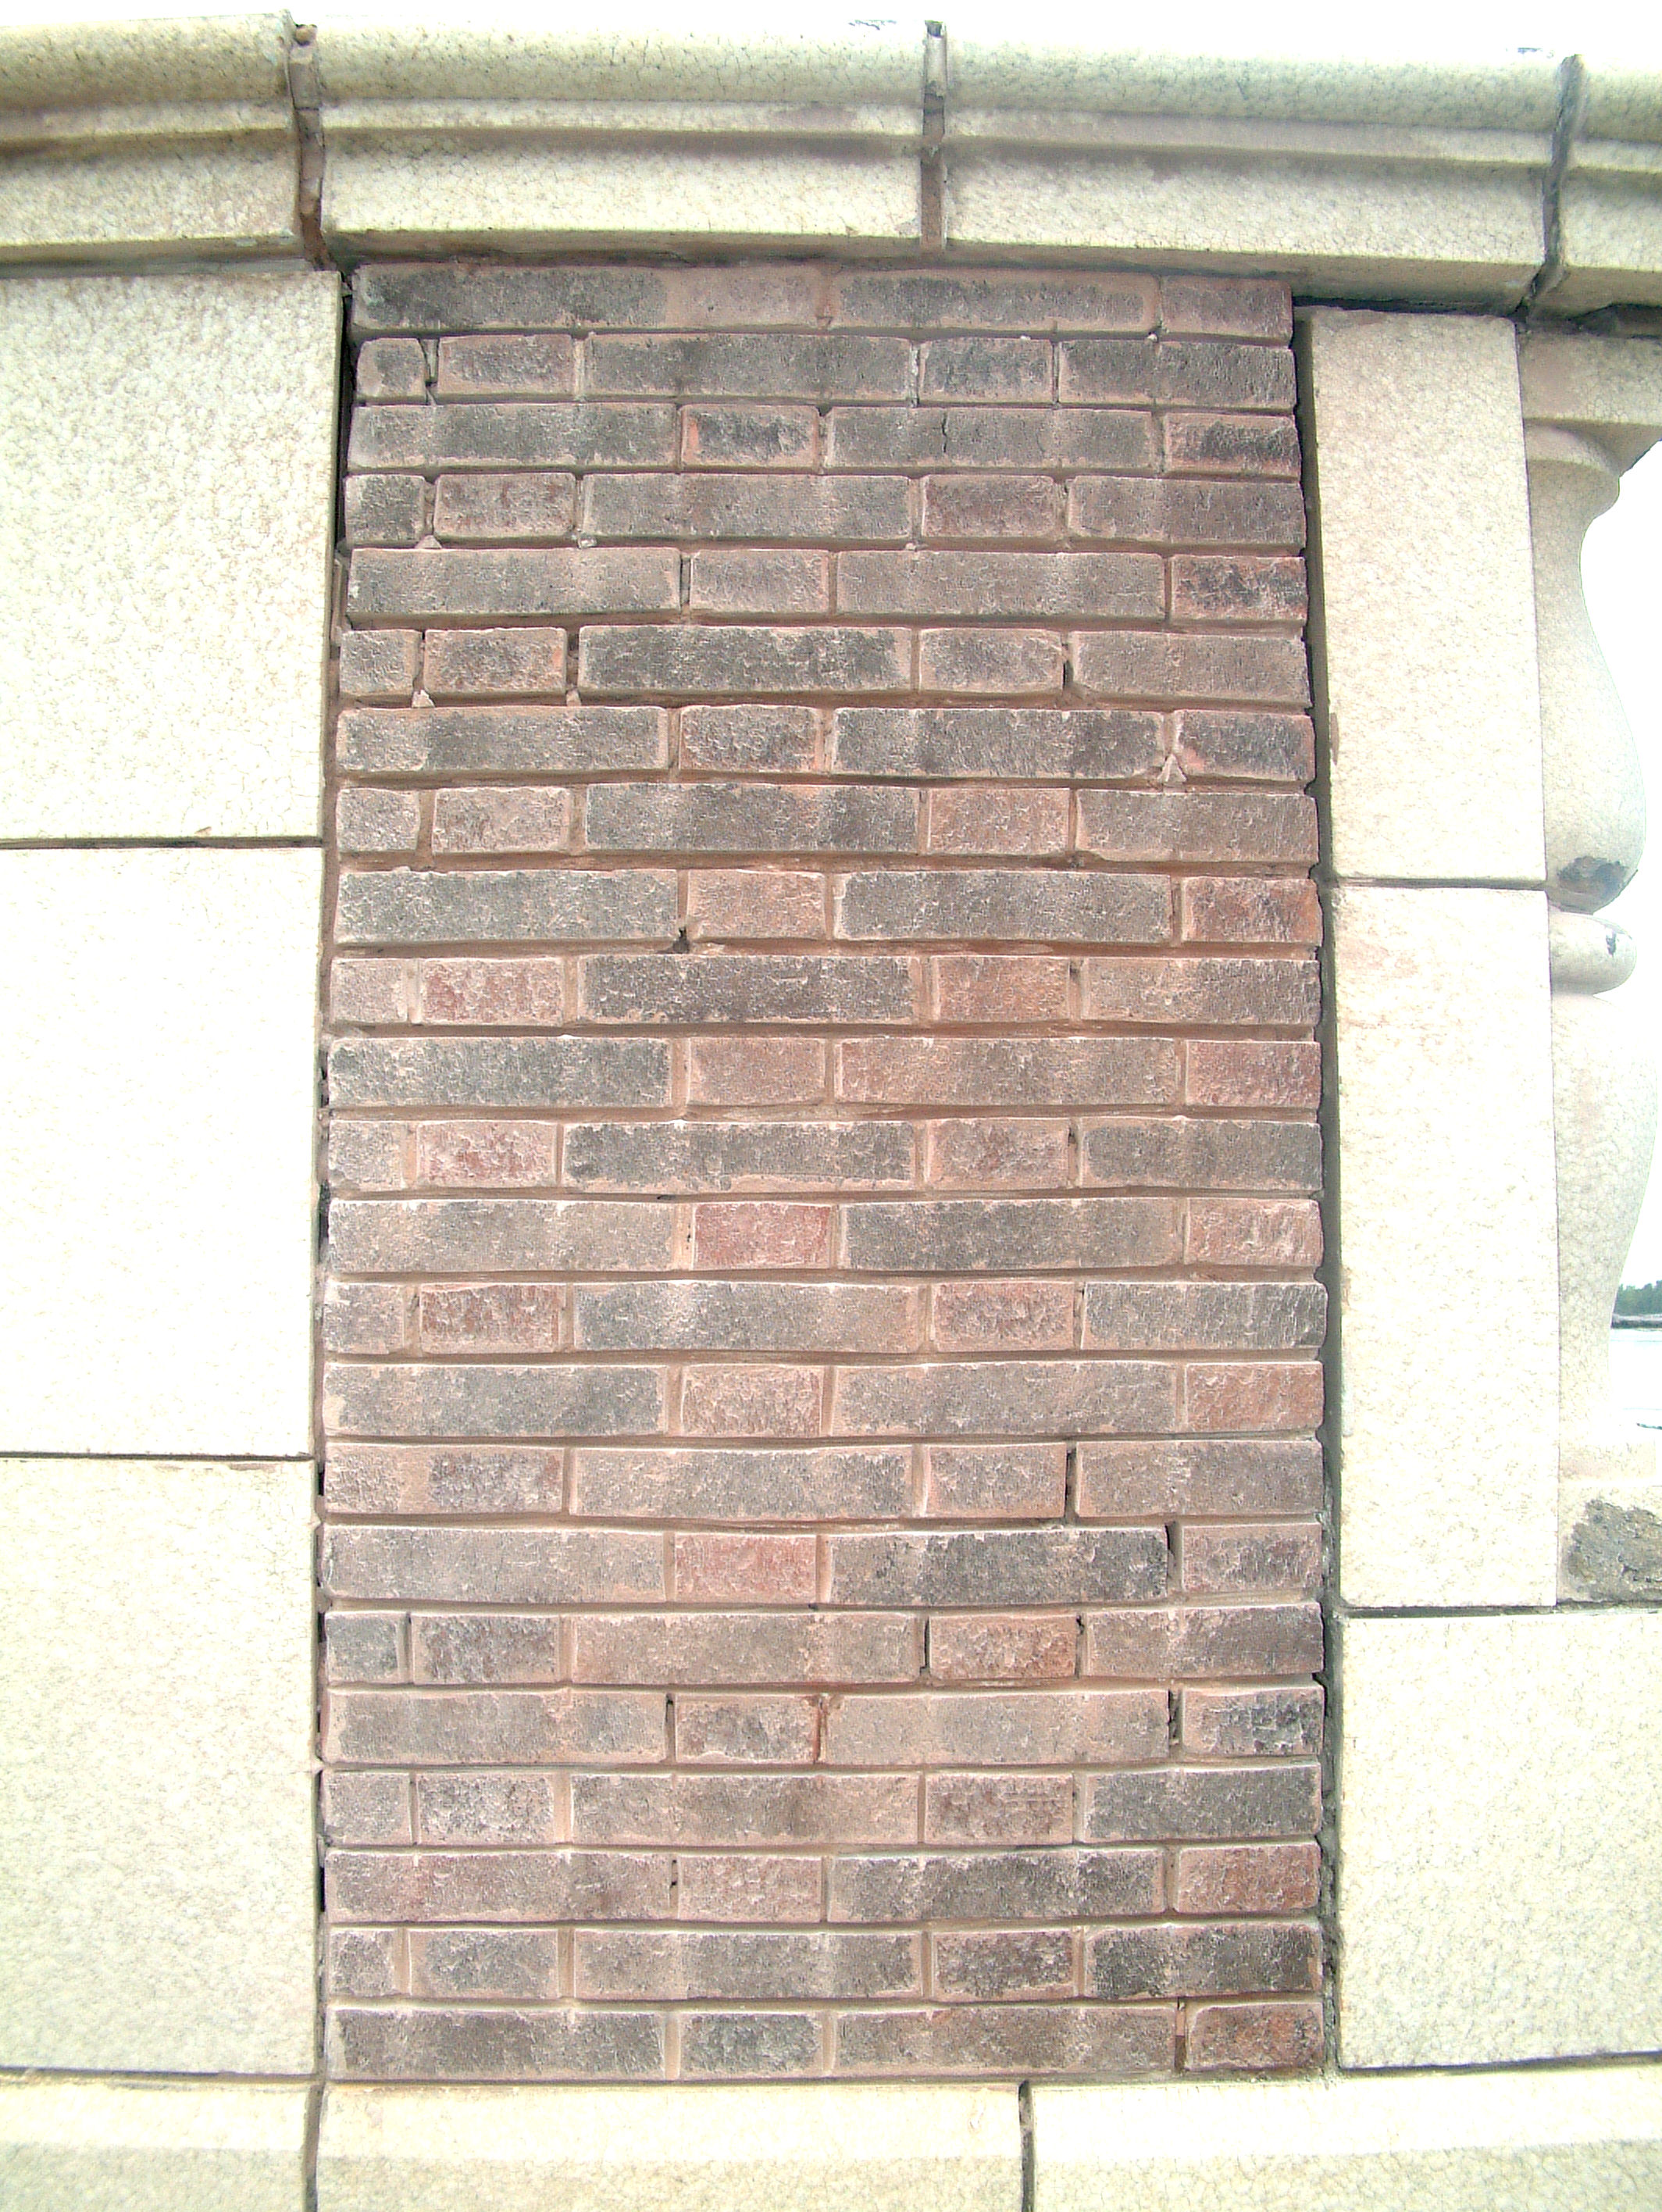 Evanston Tuckpointing Services